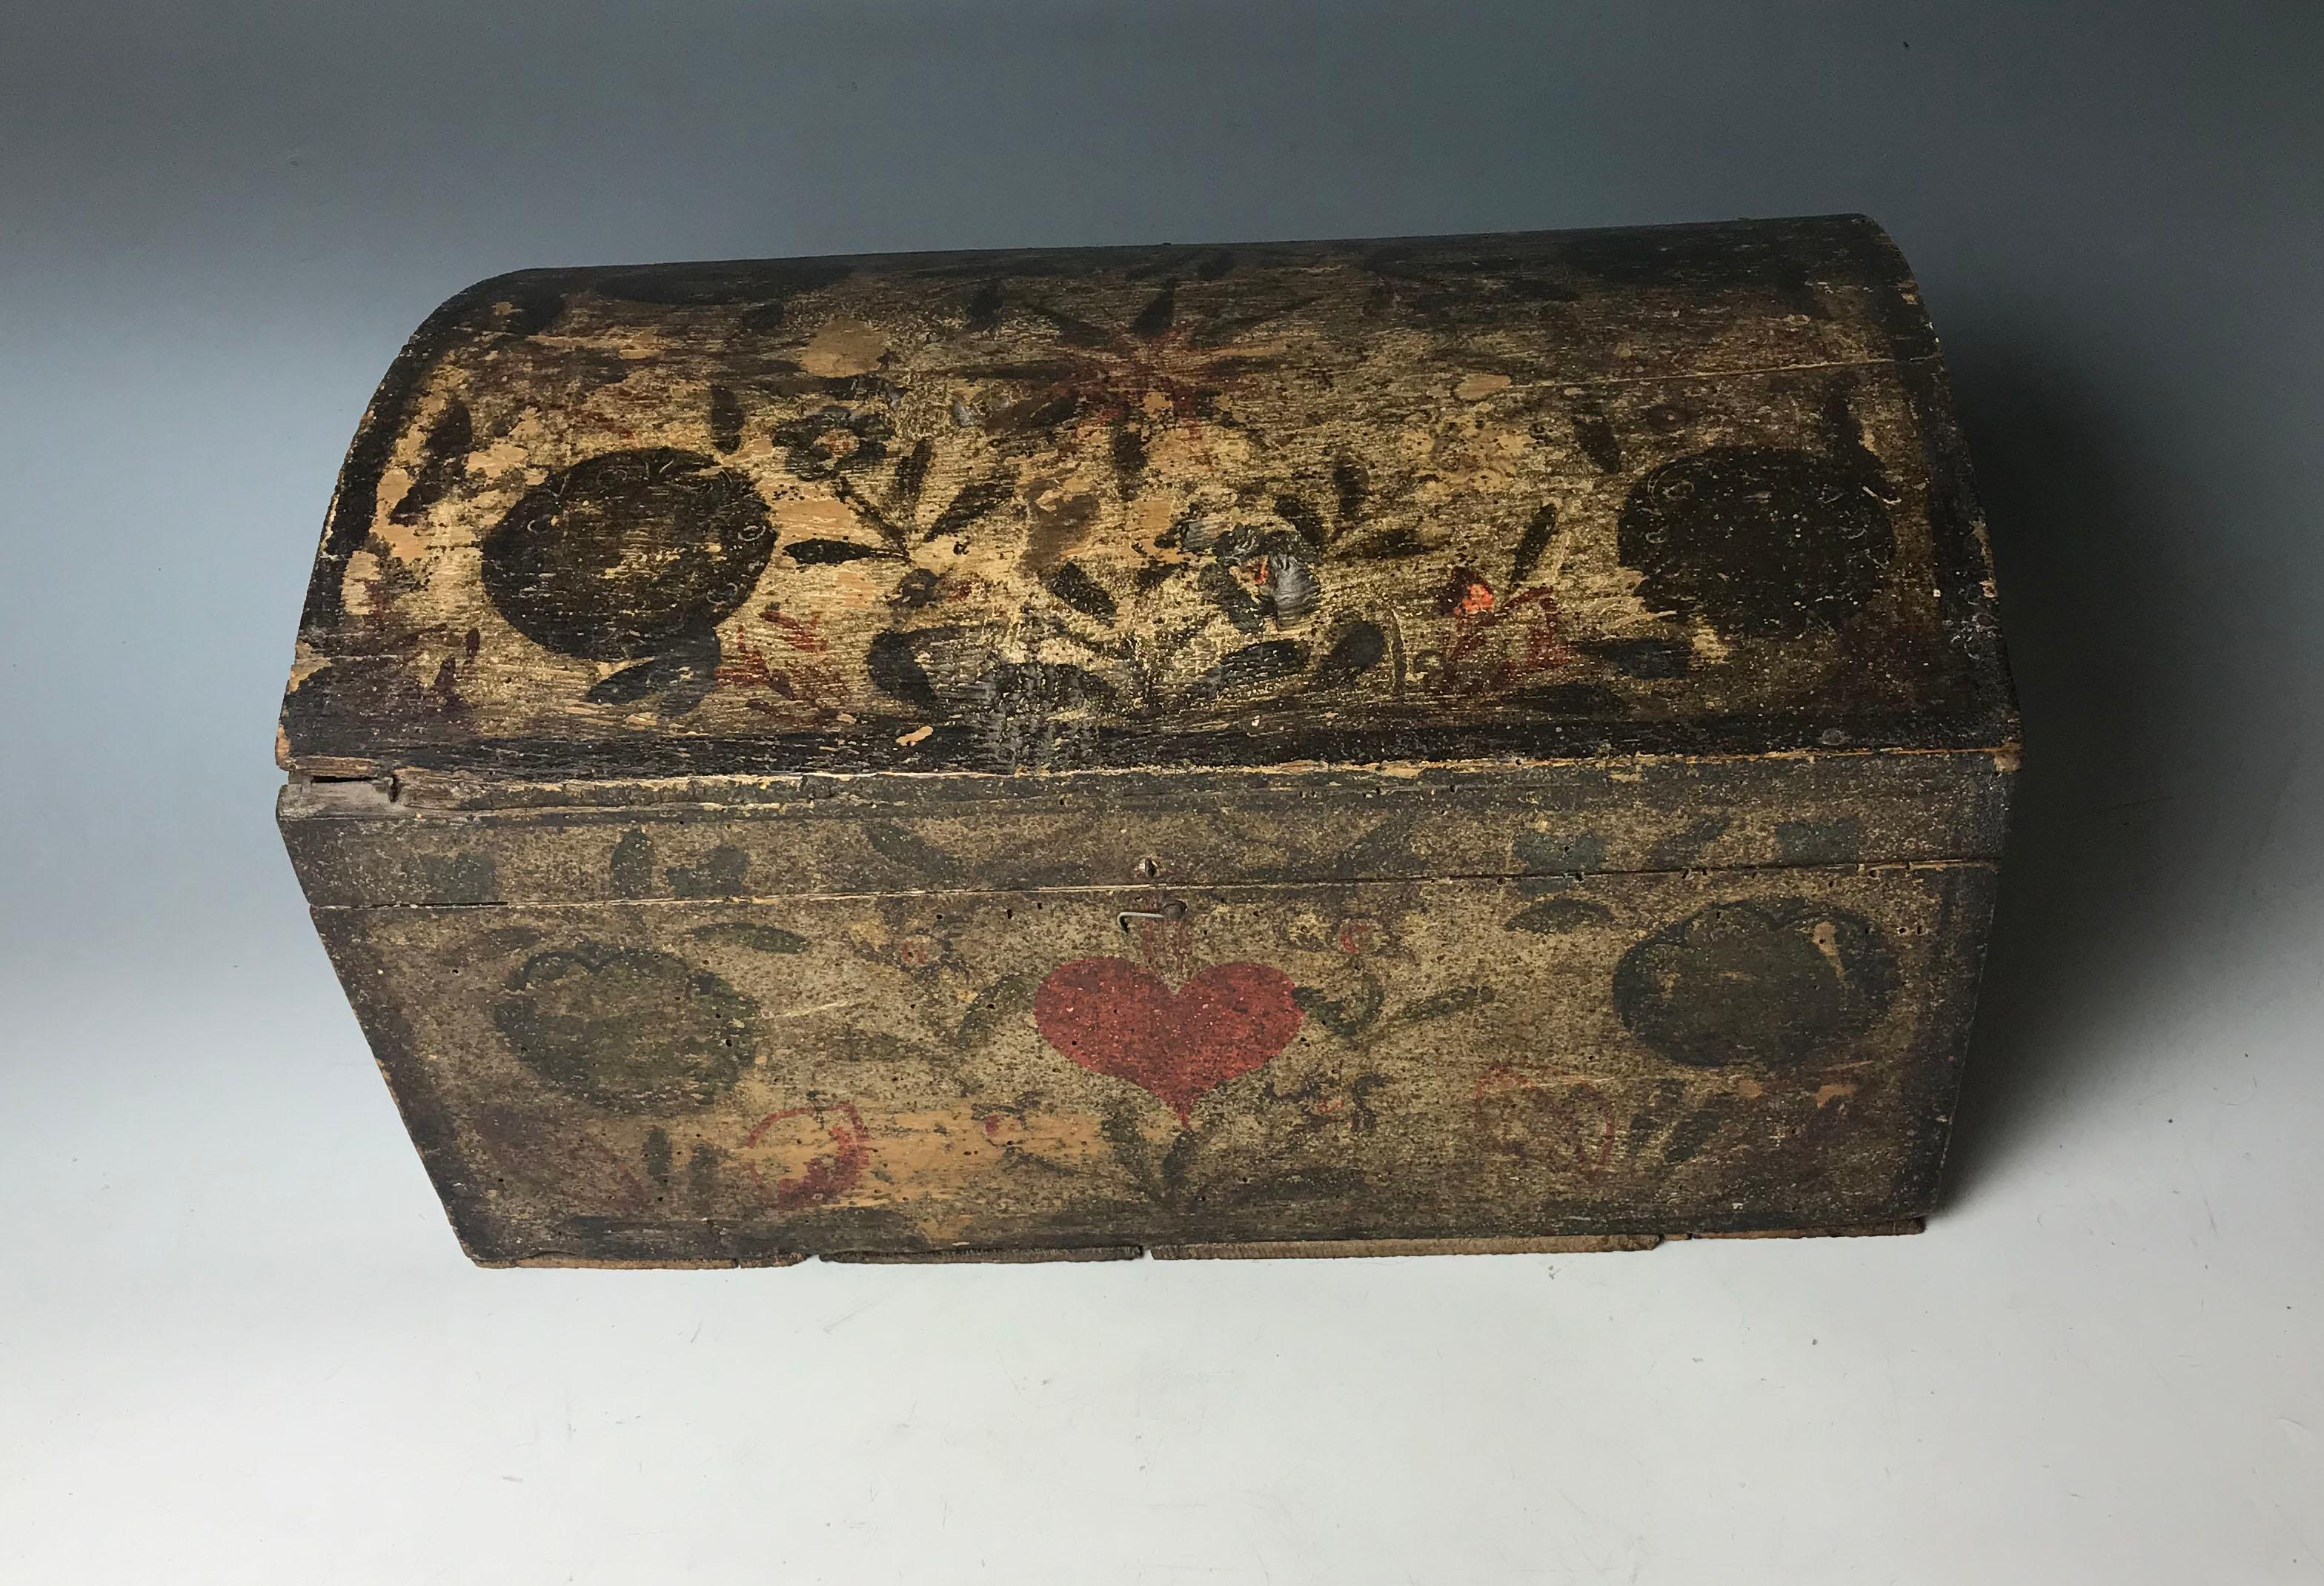 Antique French Painted Wood Normandy Folk Art Marriage Box
Pine wood with floral star and heart designs finely painted in cream with red black and green 
Circa 18th /  

44 x 25 x 25 cm 17 x 10 x 10 inches approx.
Condition: Age wear paint loss